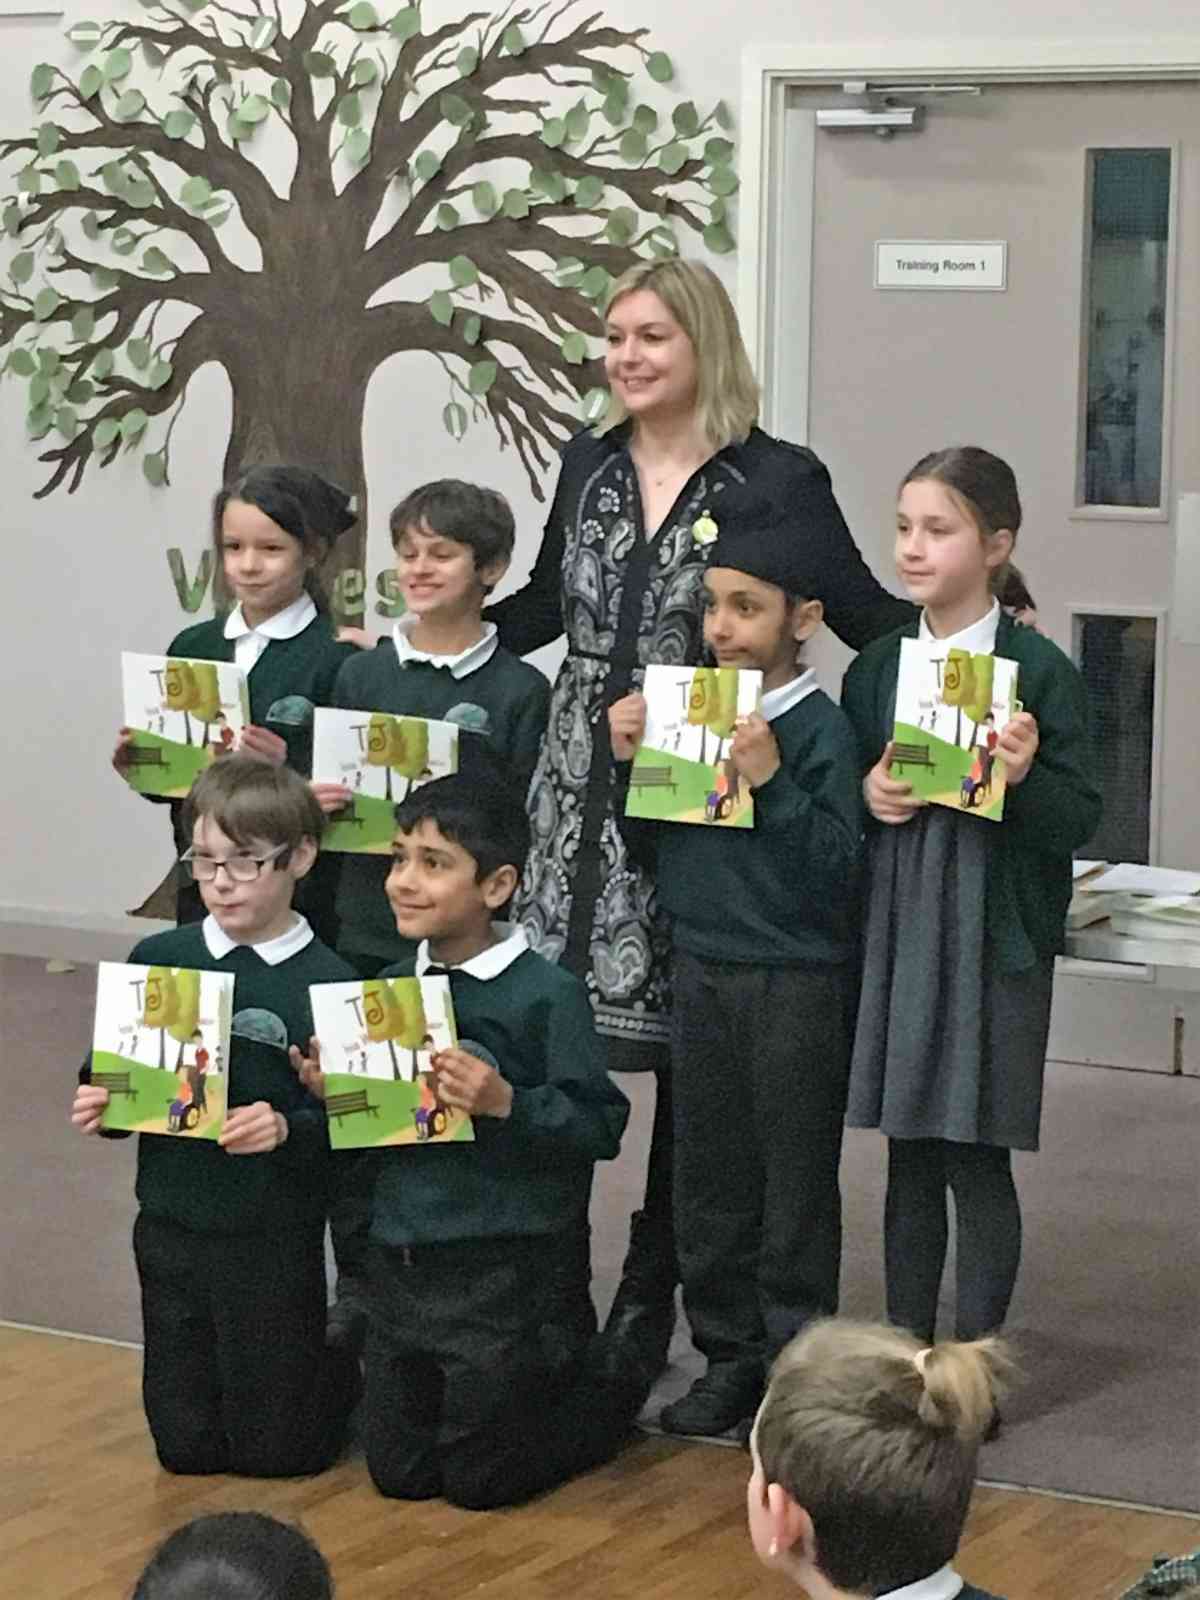 Amanda Kehoe's Visit to Lightwoods Primary